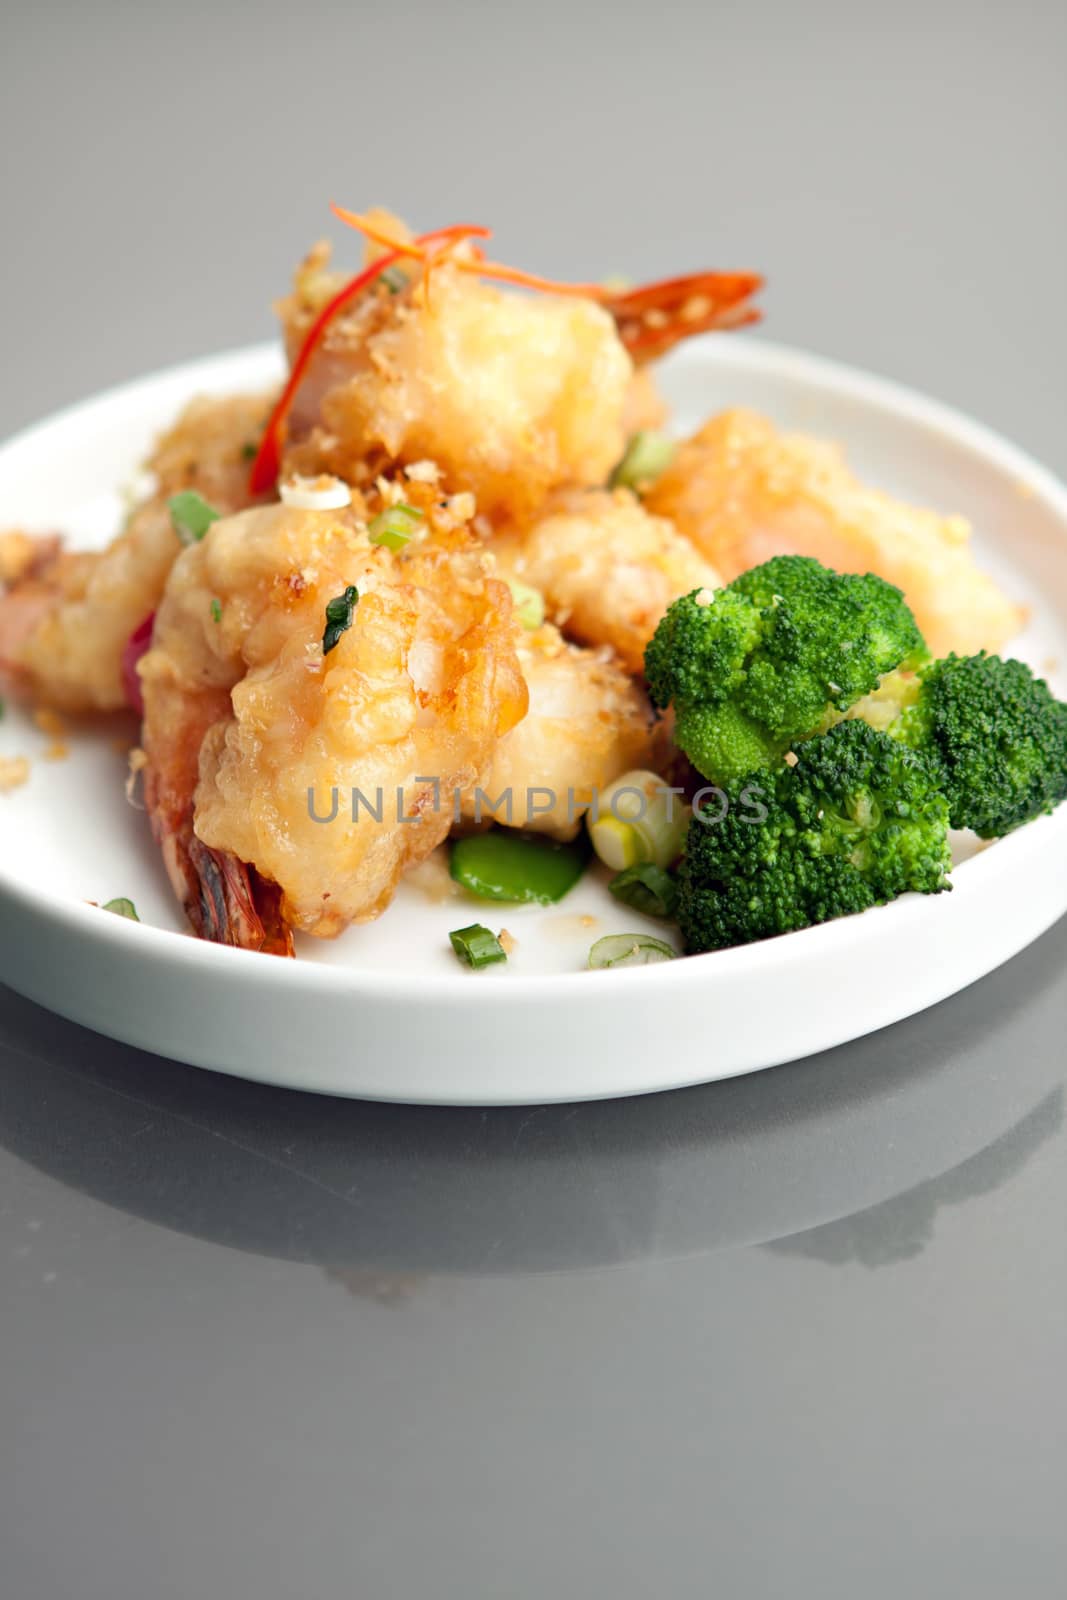 Fried Thai style honey shrimp dish presented beautifully on a round white plate.